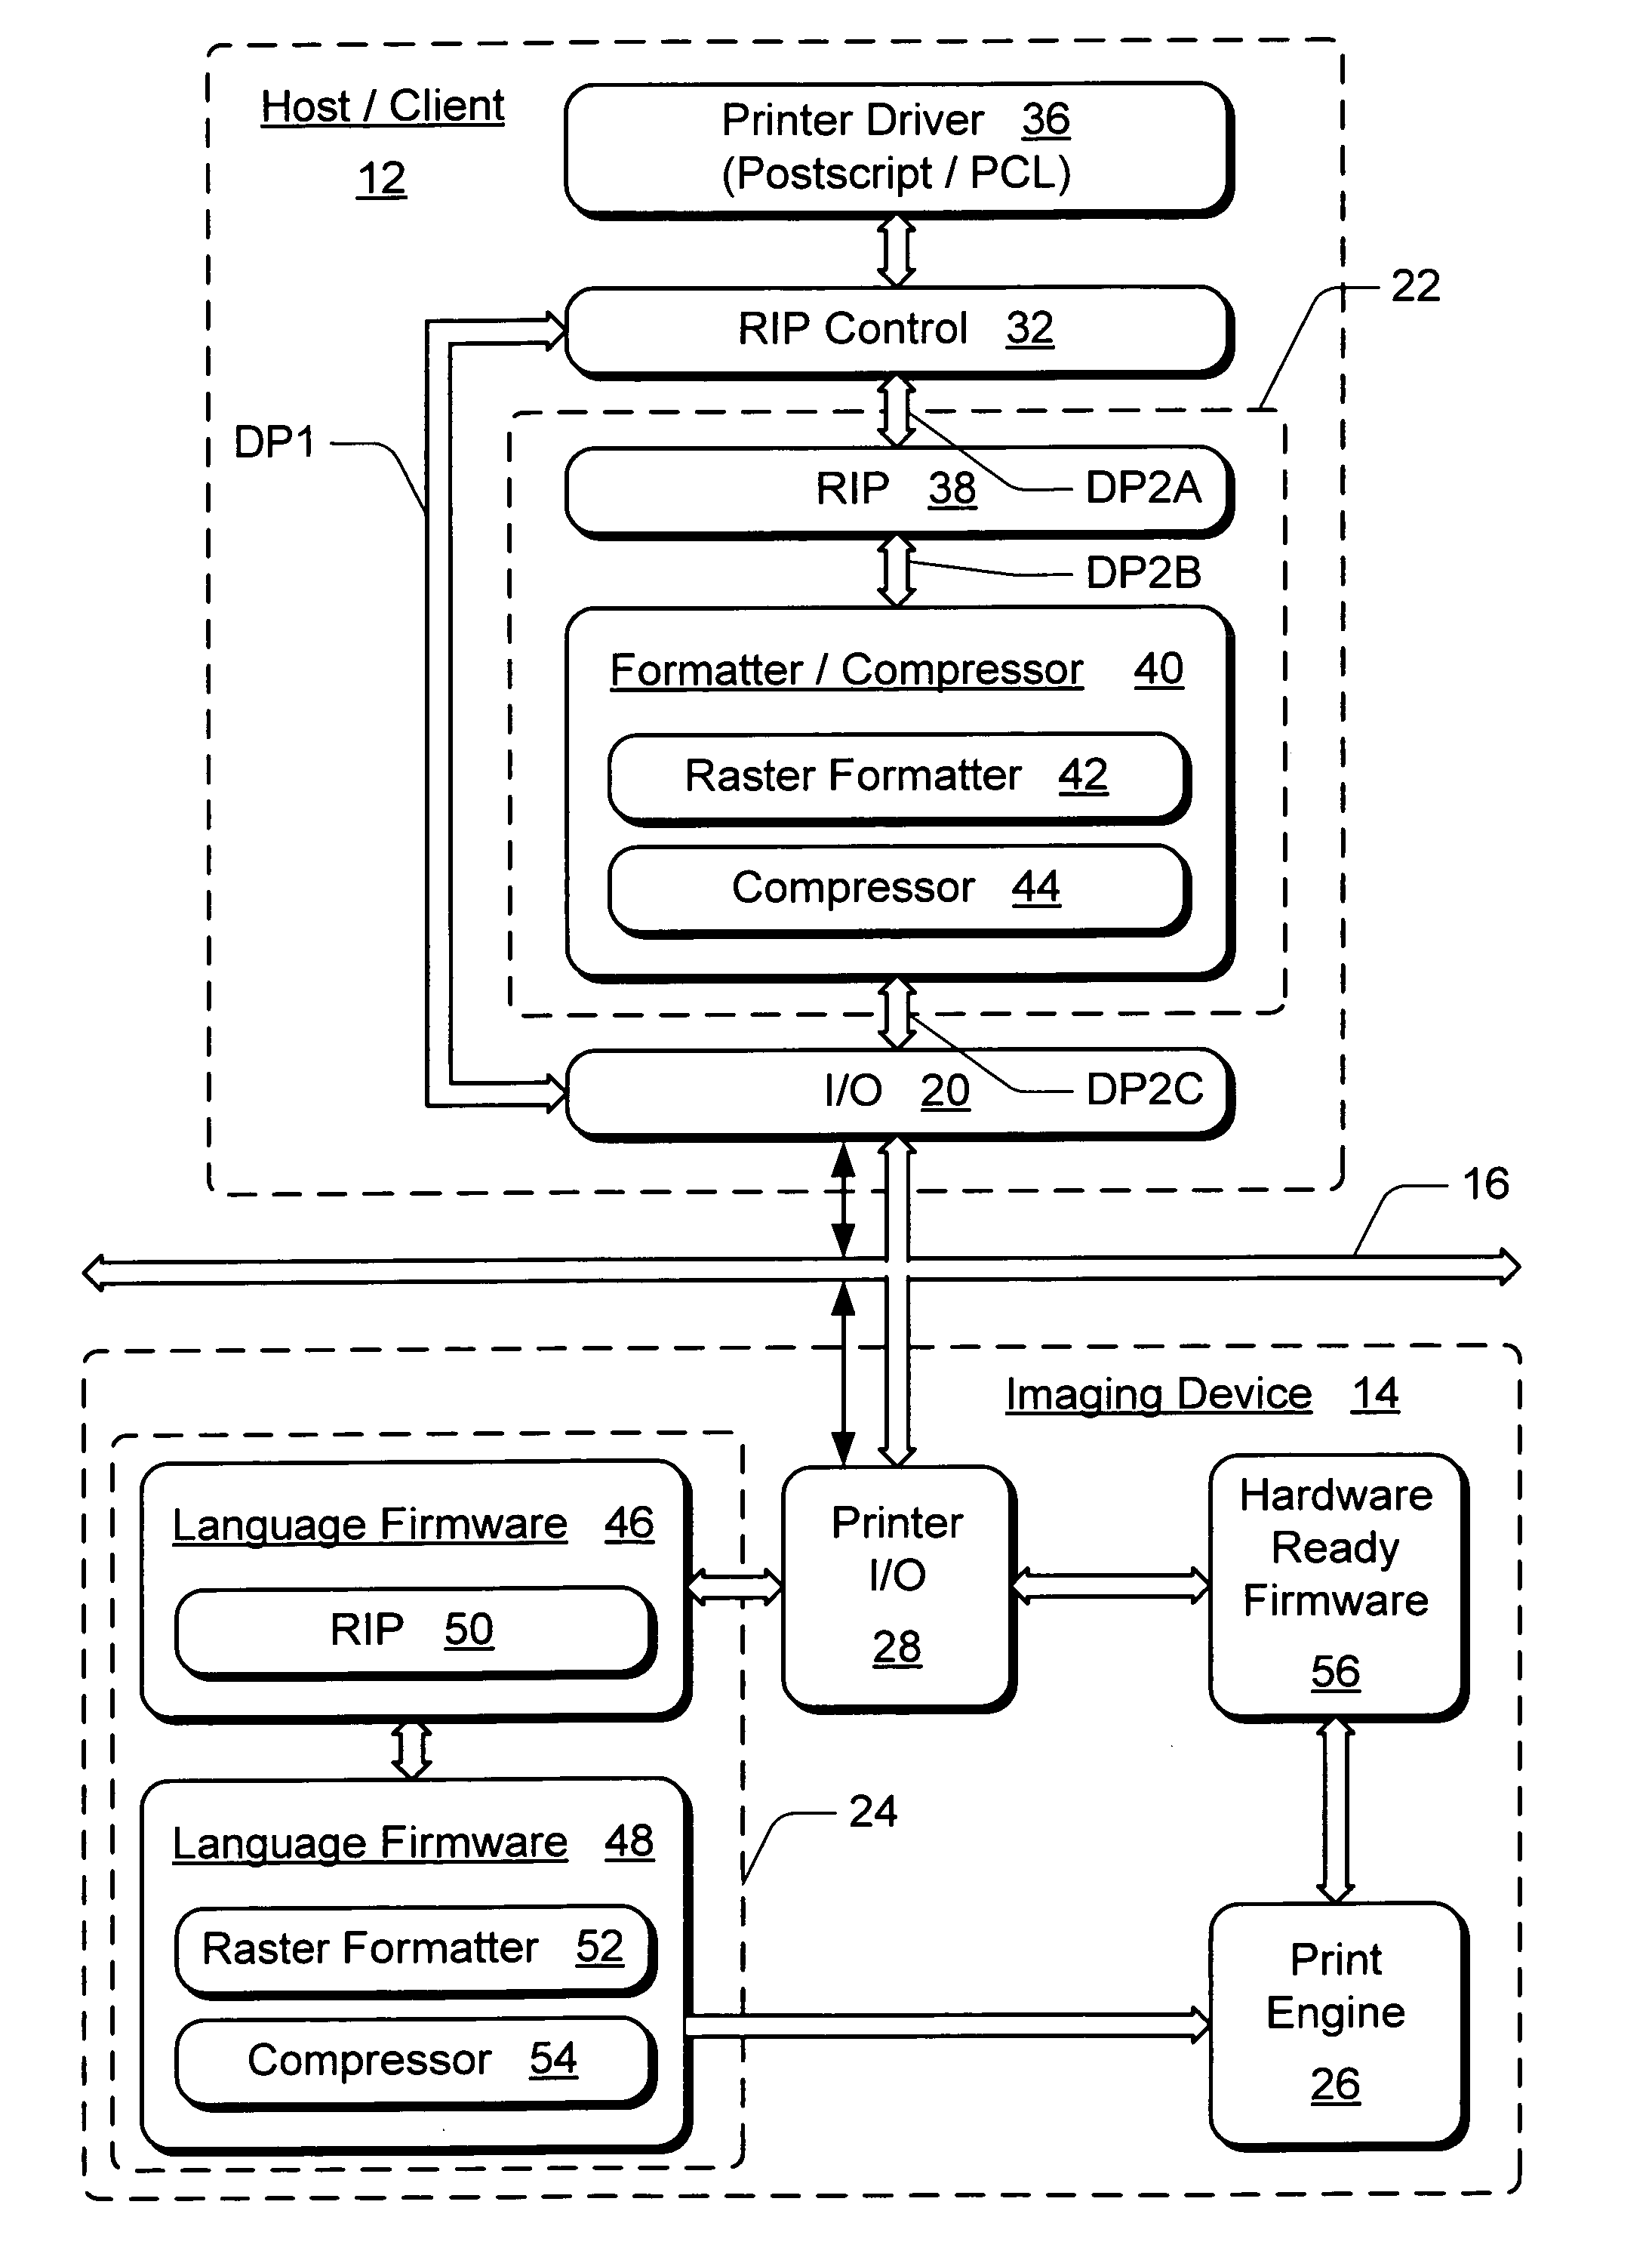 Load balancing for raster image processing across a printing system